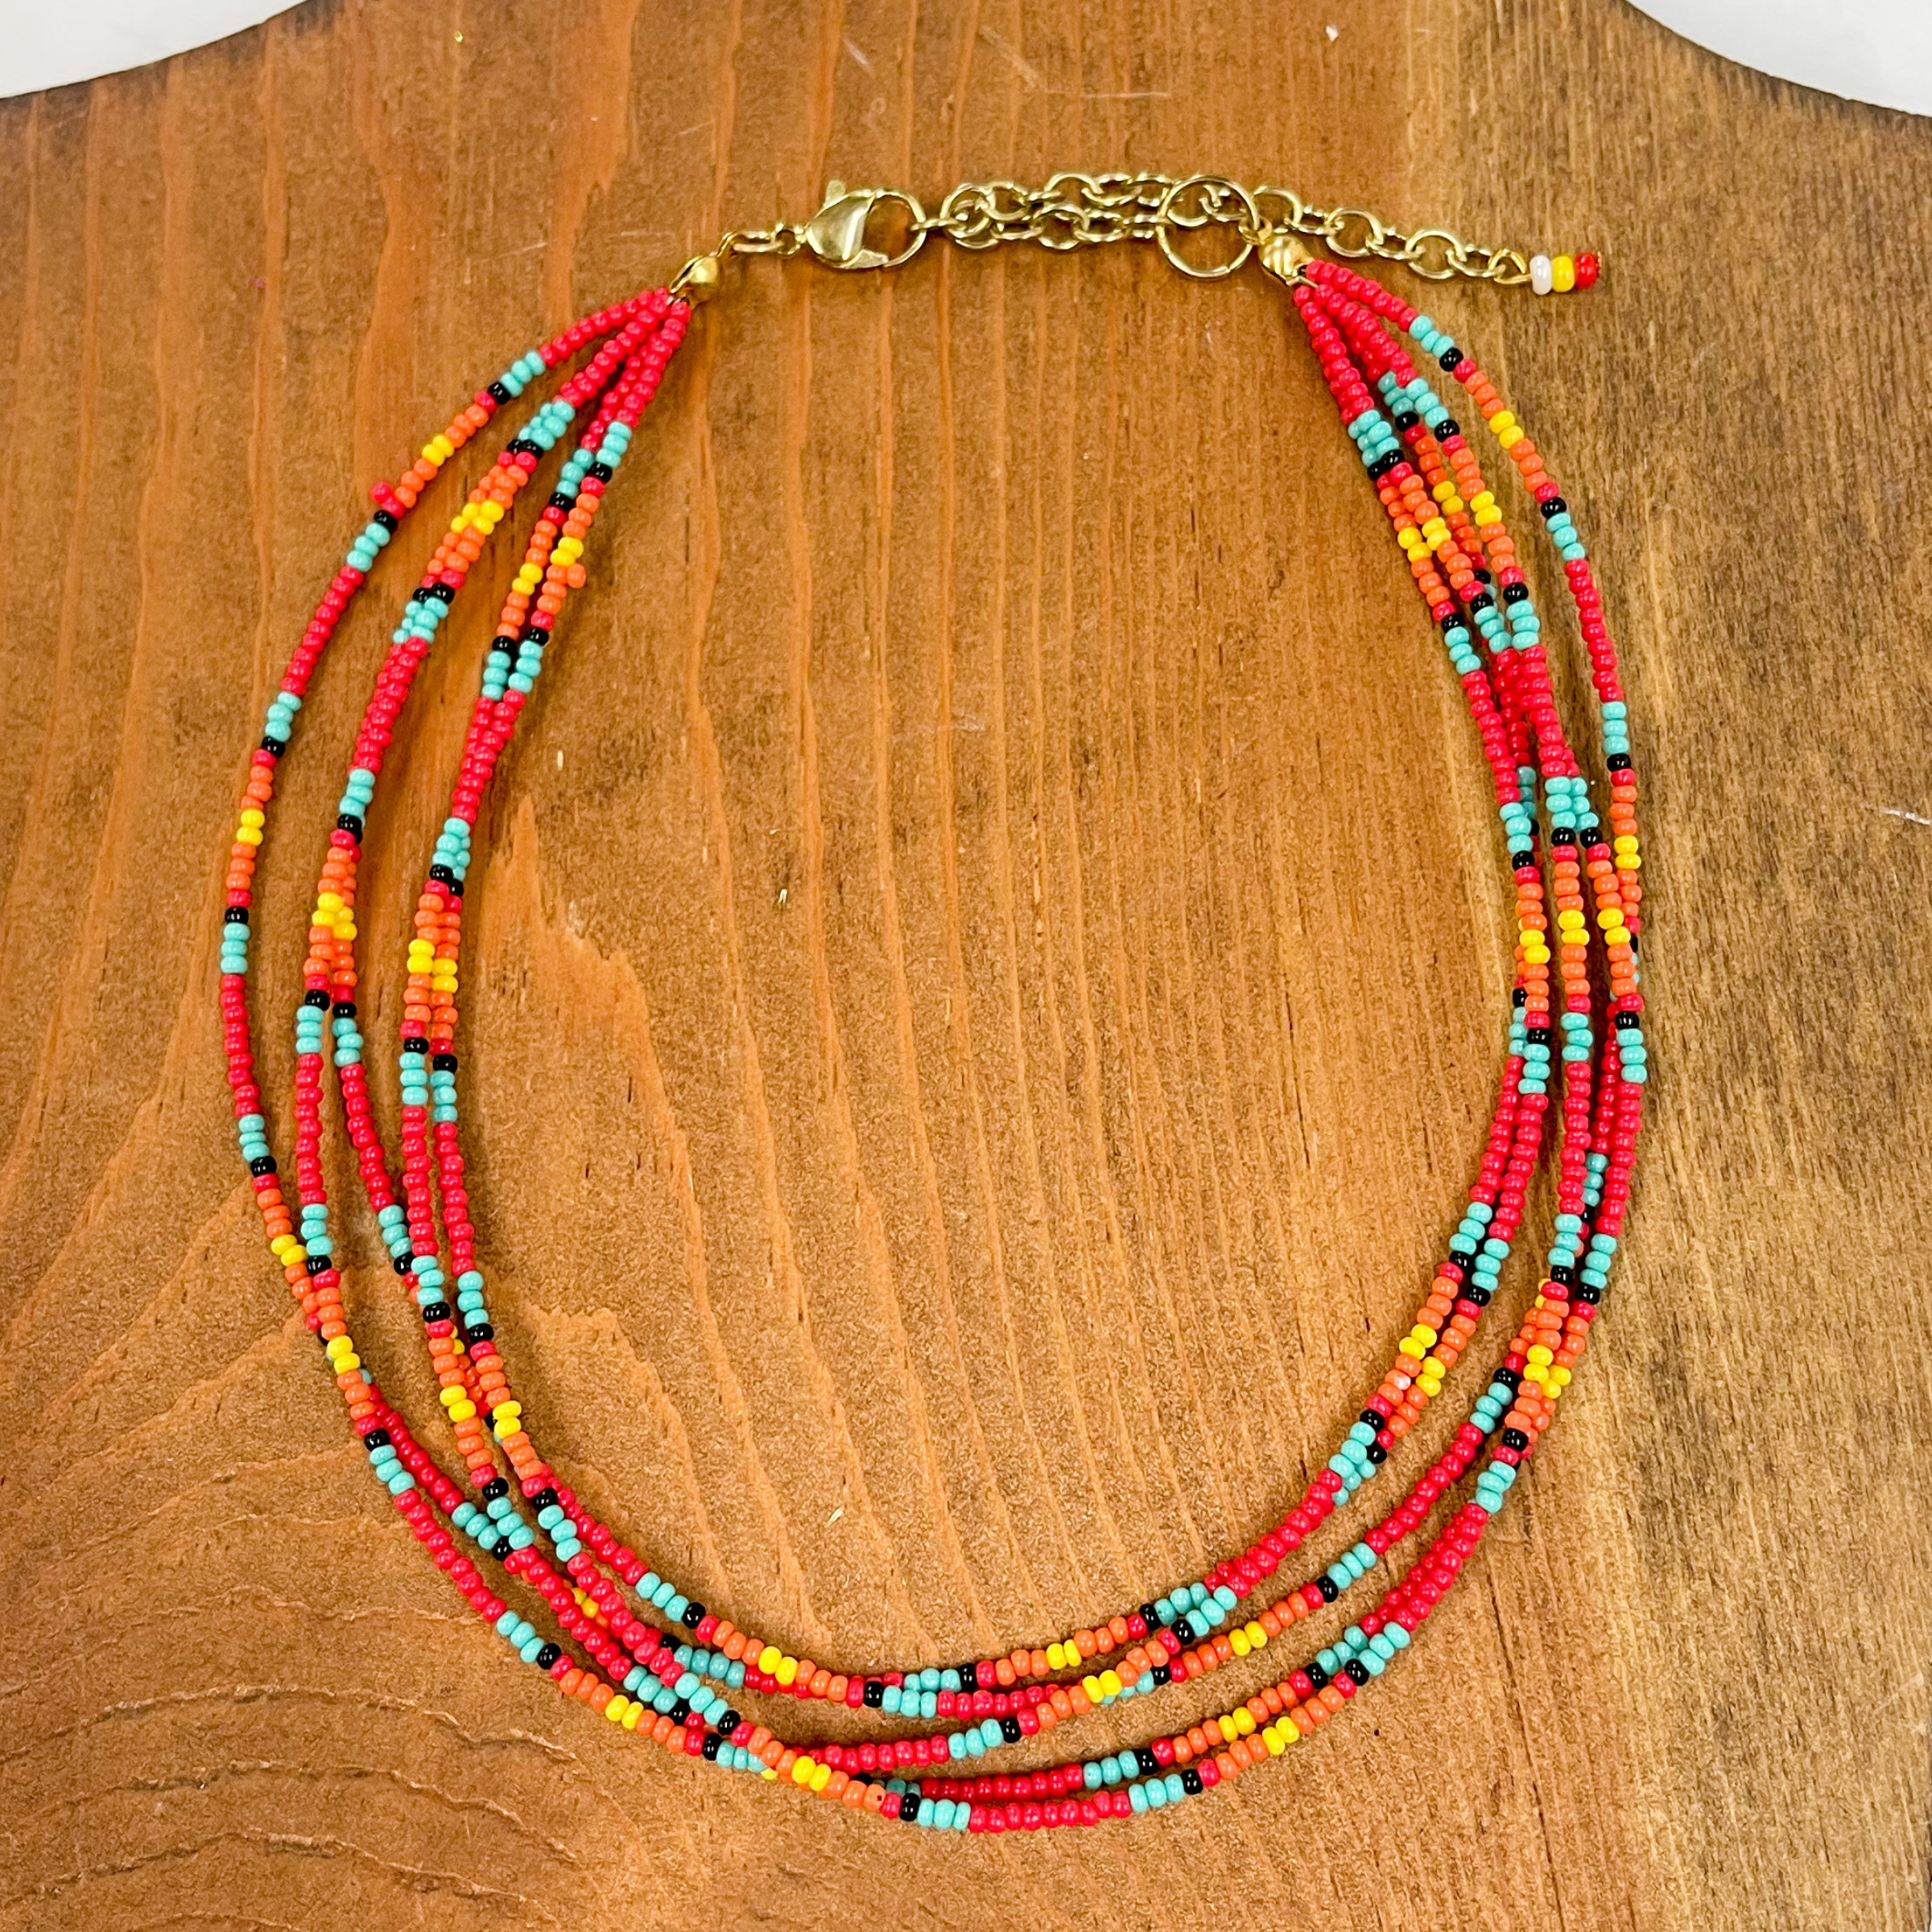 Multilayered seedbeaded choker in red multicolor.  Majority of the beads are red, other colors include; turquoise, black, orange, and yellow. The adjustable  chain has three beads in colors, white, yellow, and  red. These earrings are taken on a brown block.